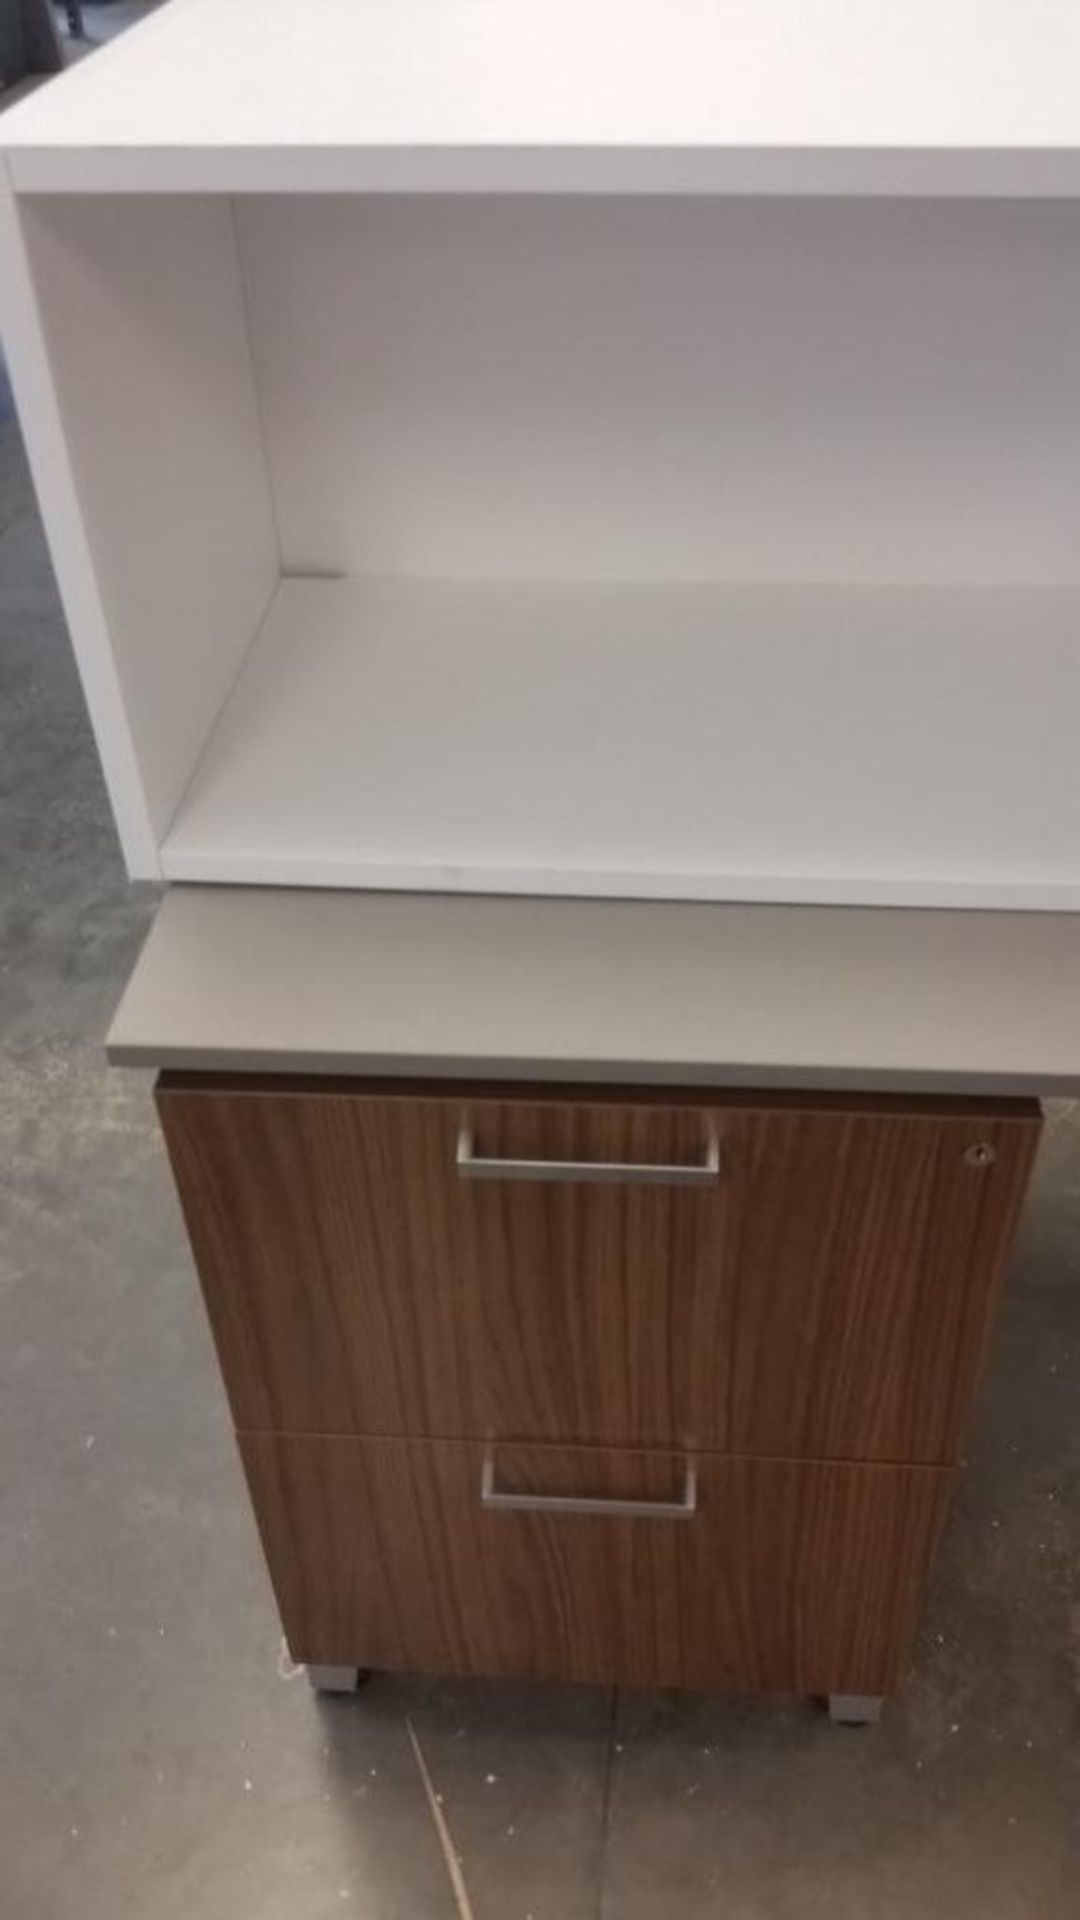 Allsteel office desk with (2) overhead cabinets, (5) drawers, (1) hanging cabinet - Image 5 of 5